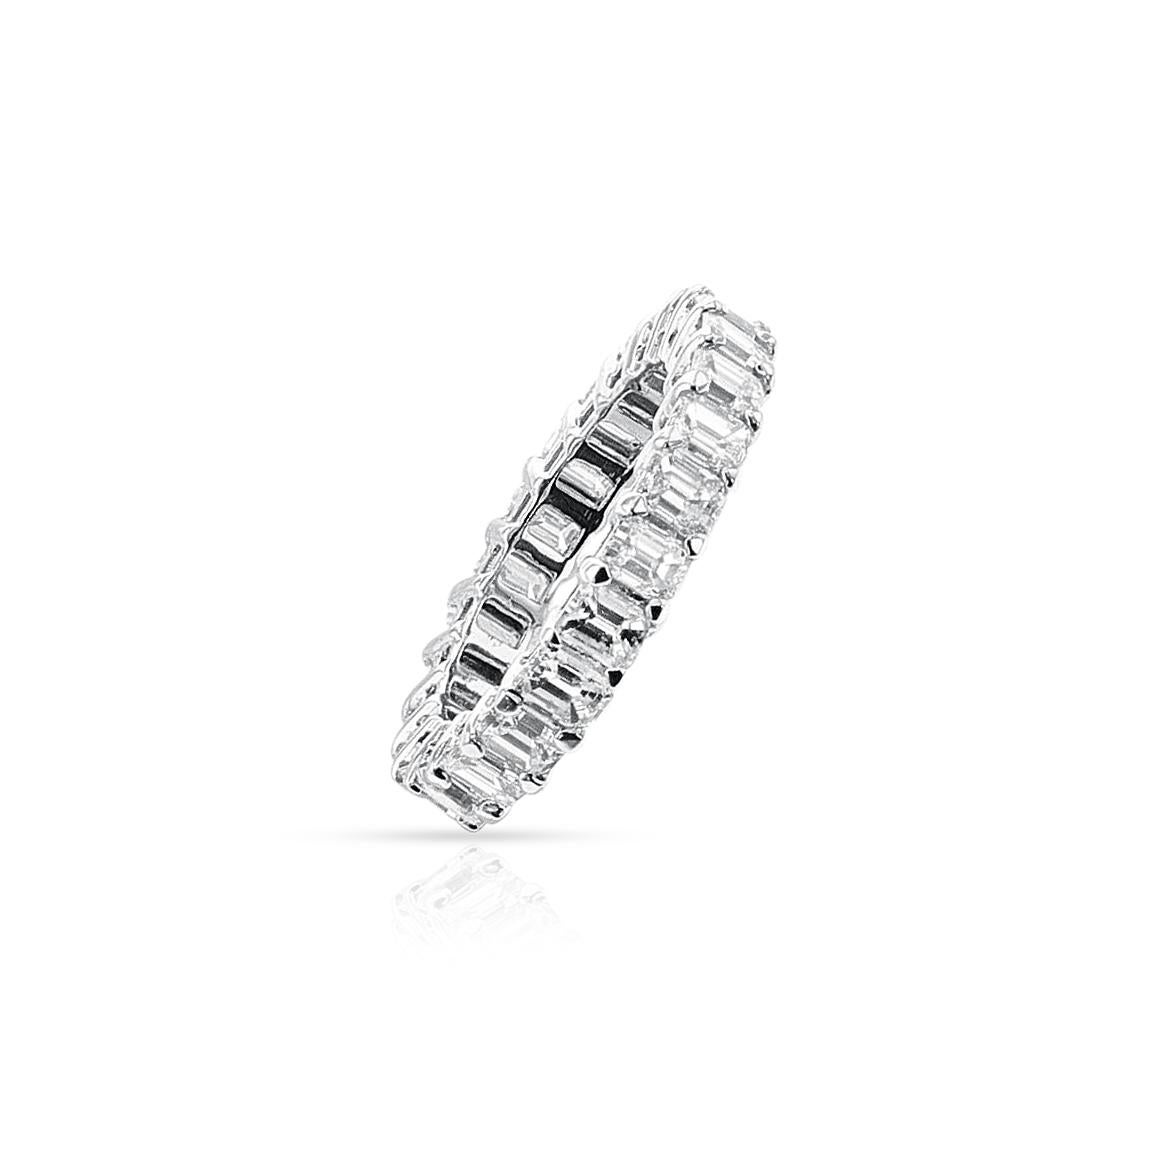 Emerald-Cut 4.61 ct. Diamond Eternity Band, 18k White Gold  In New Condition For Sale In New York, NY